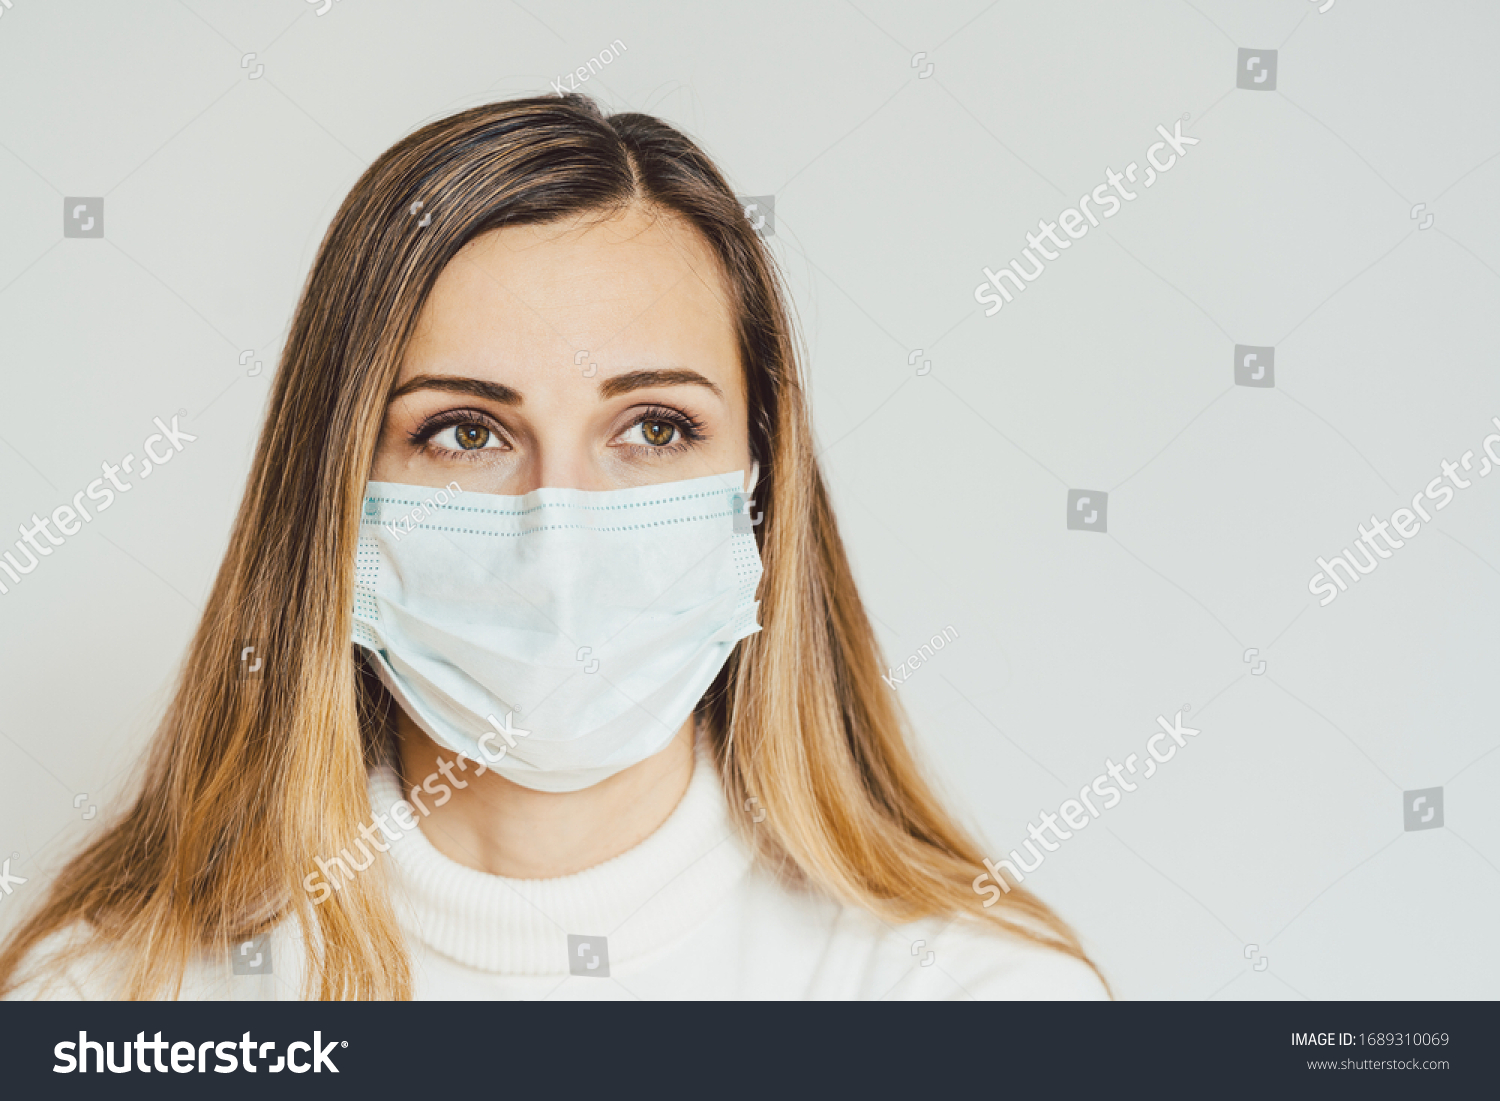 Anxious woman with face mask worried about the Covid-19 outbreak staying at home #1689310069